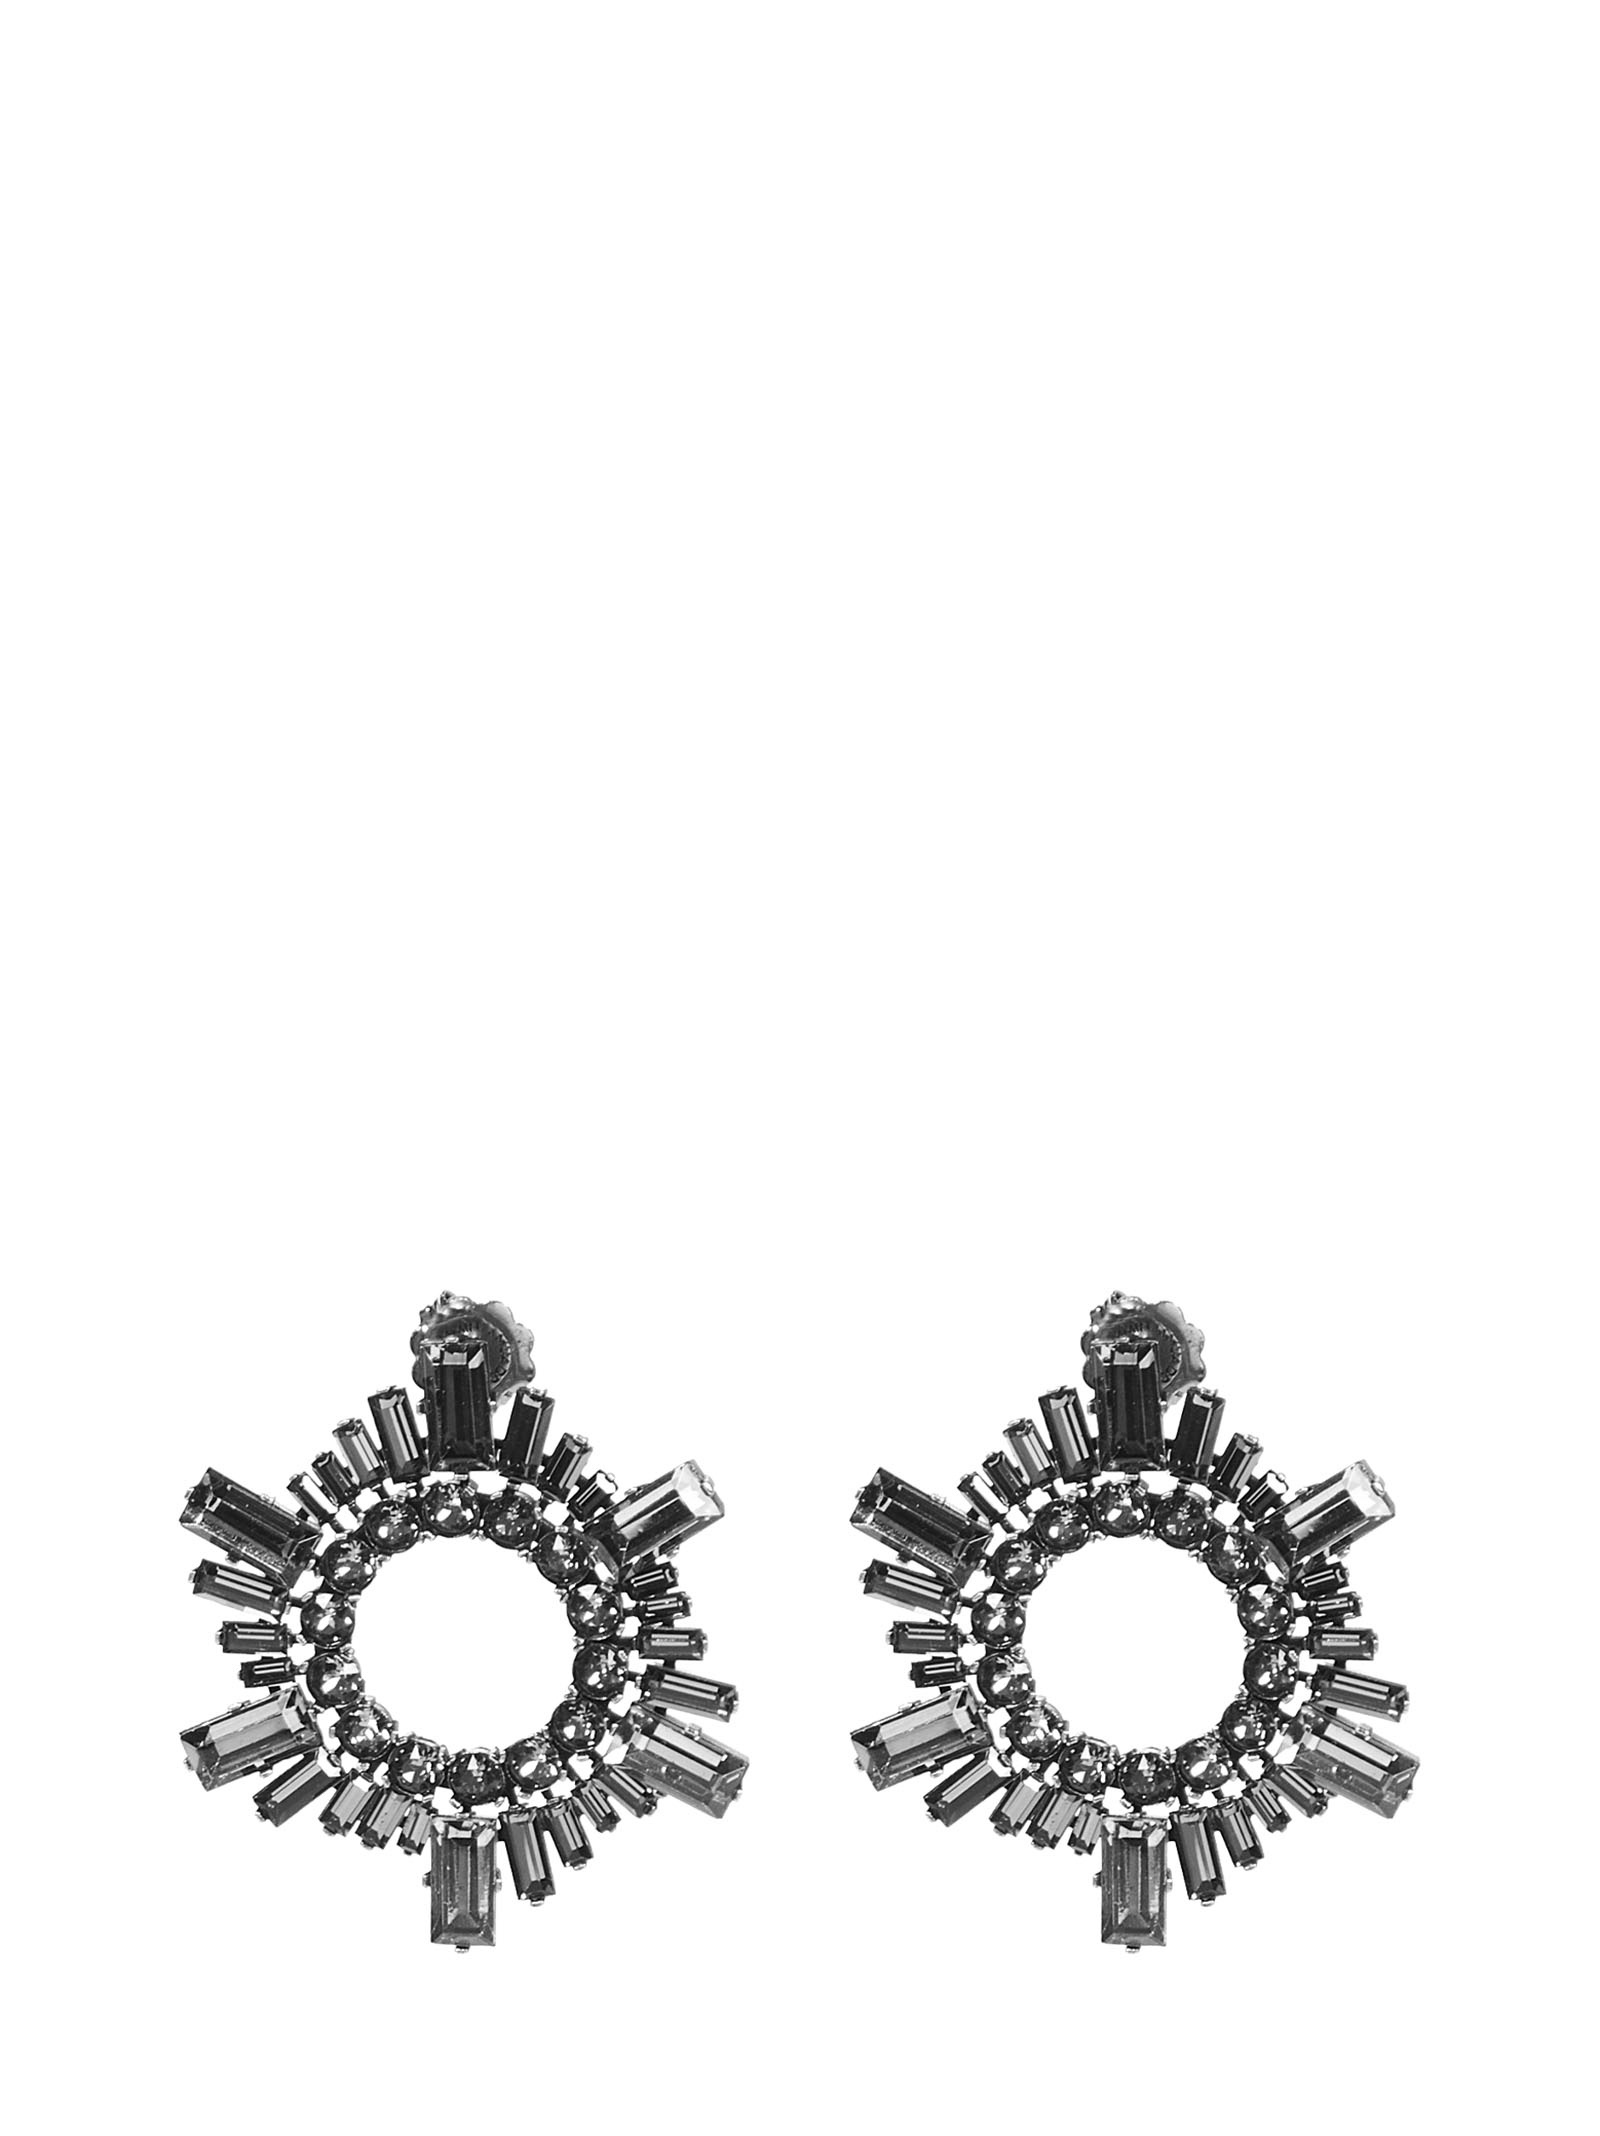 MINI BEGUM silver brass earrings with black crystals set. - 1